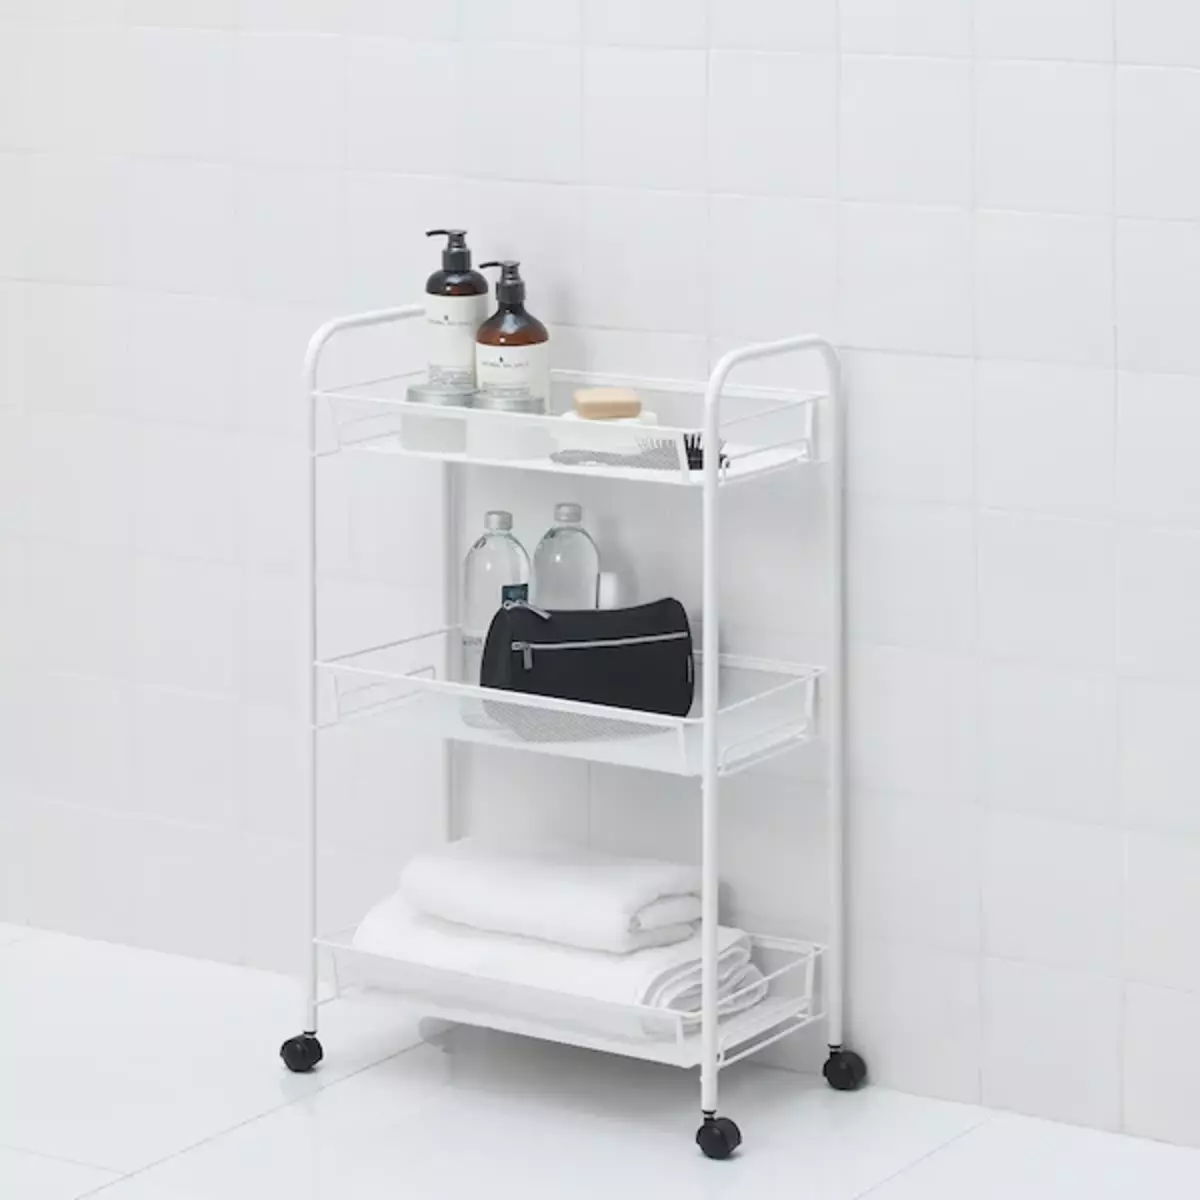 11 useful products from IKEA for those who want to make a bathroom to relax 7050_84